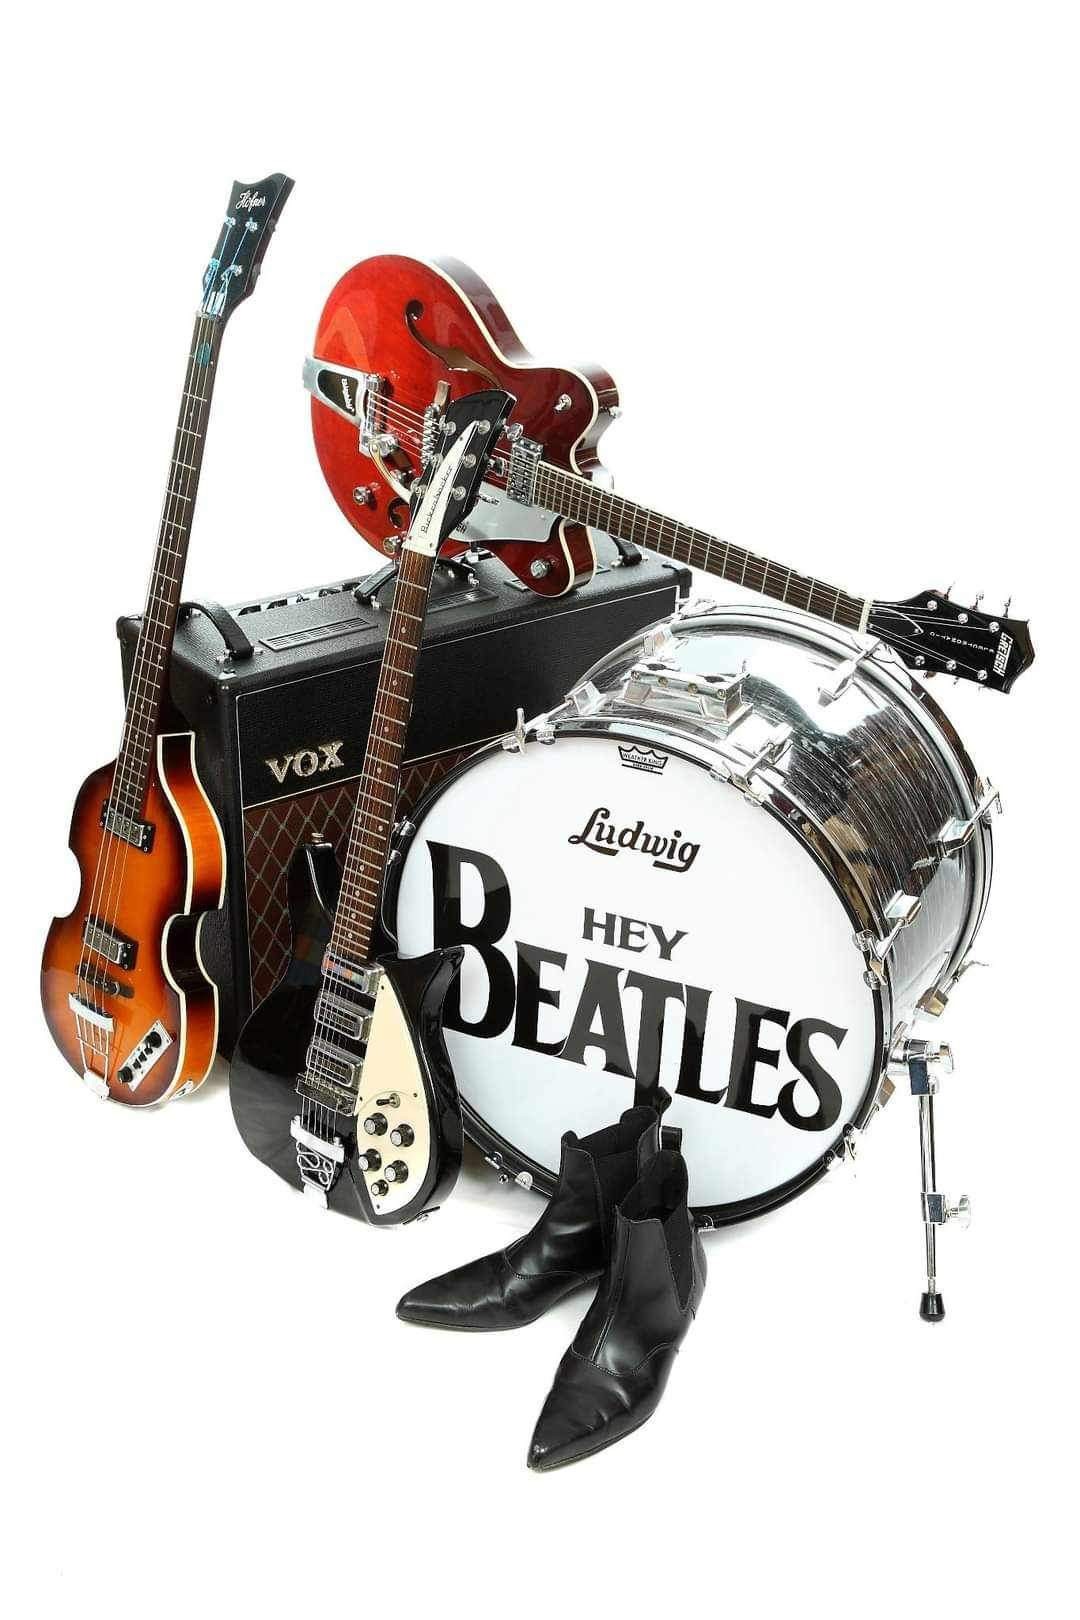 Beatles Tribute Night  on Sep 14, 19:30@March United Services Club - Buy tickets and Get information on whittlesey music nights 